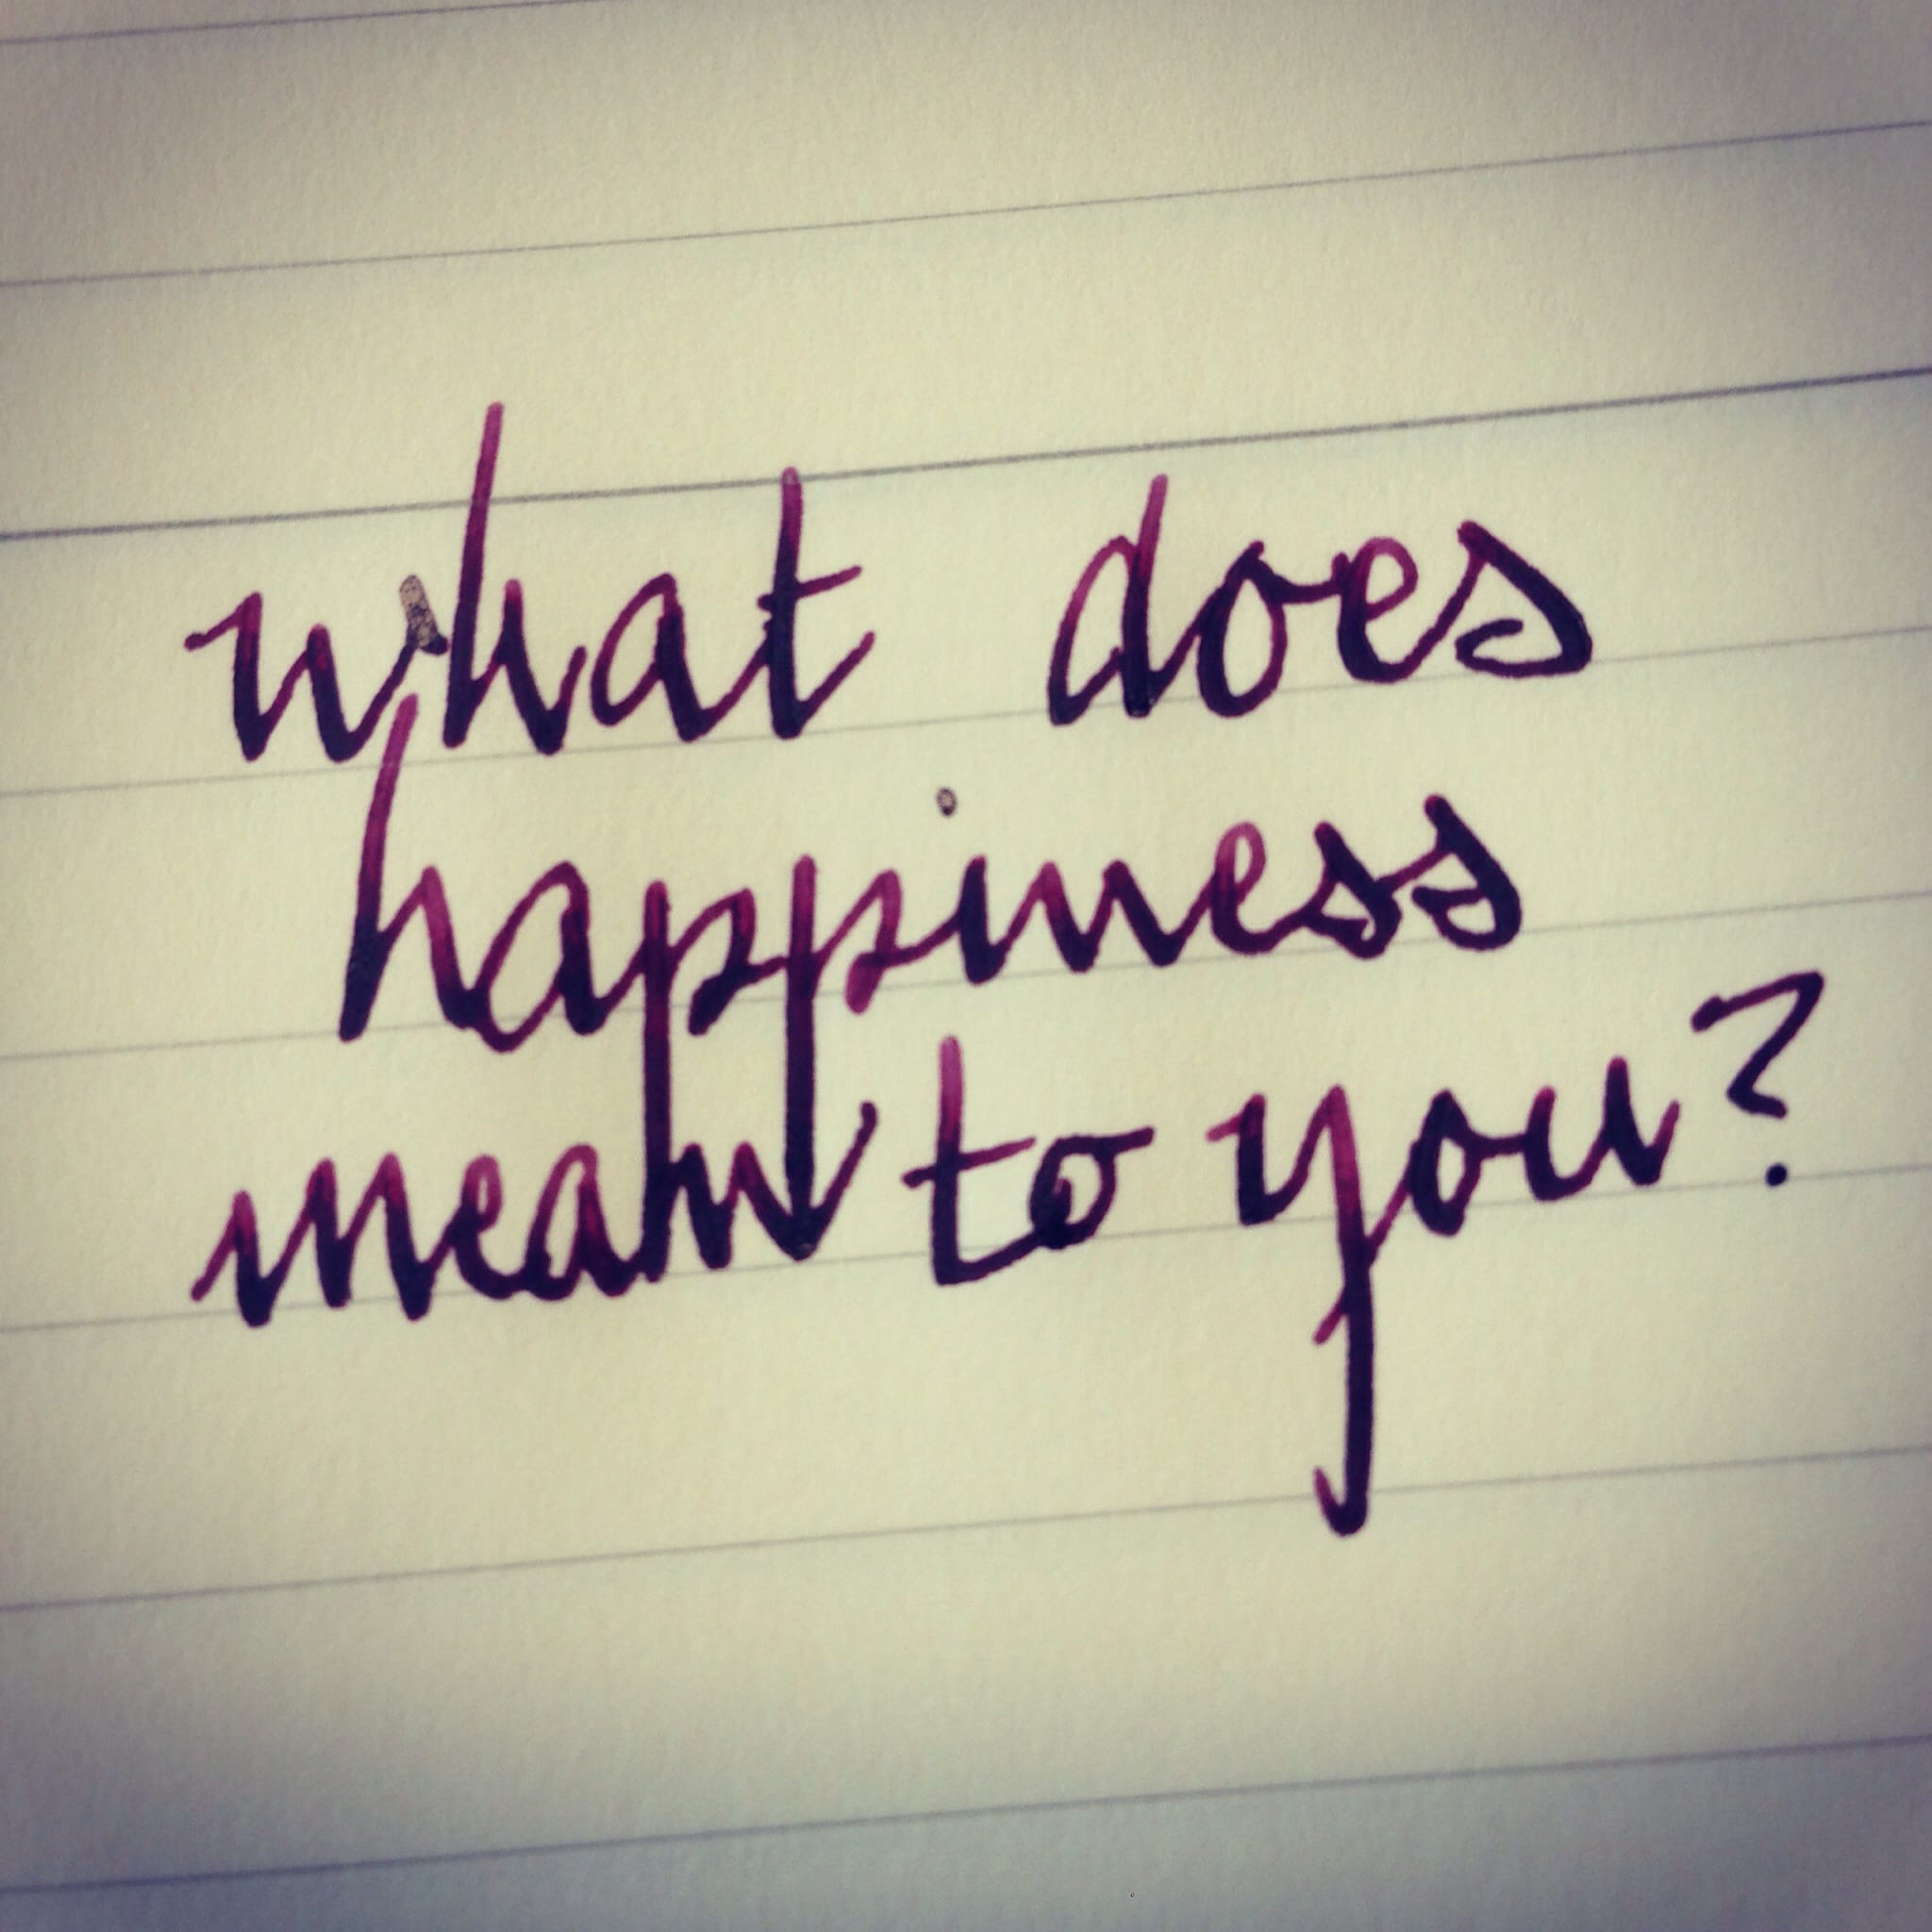 What does happiness mean to you?